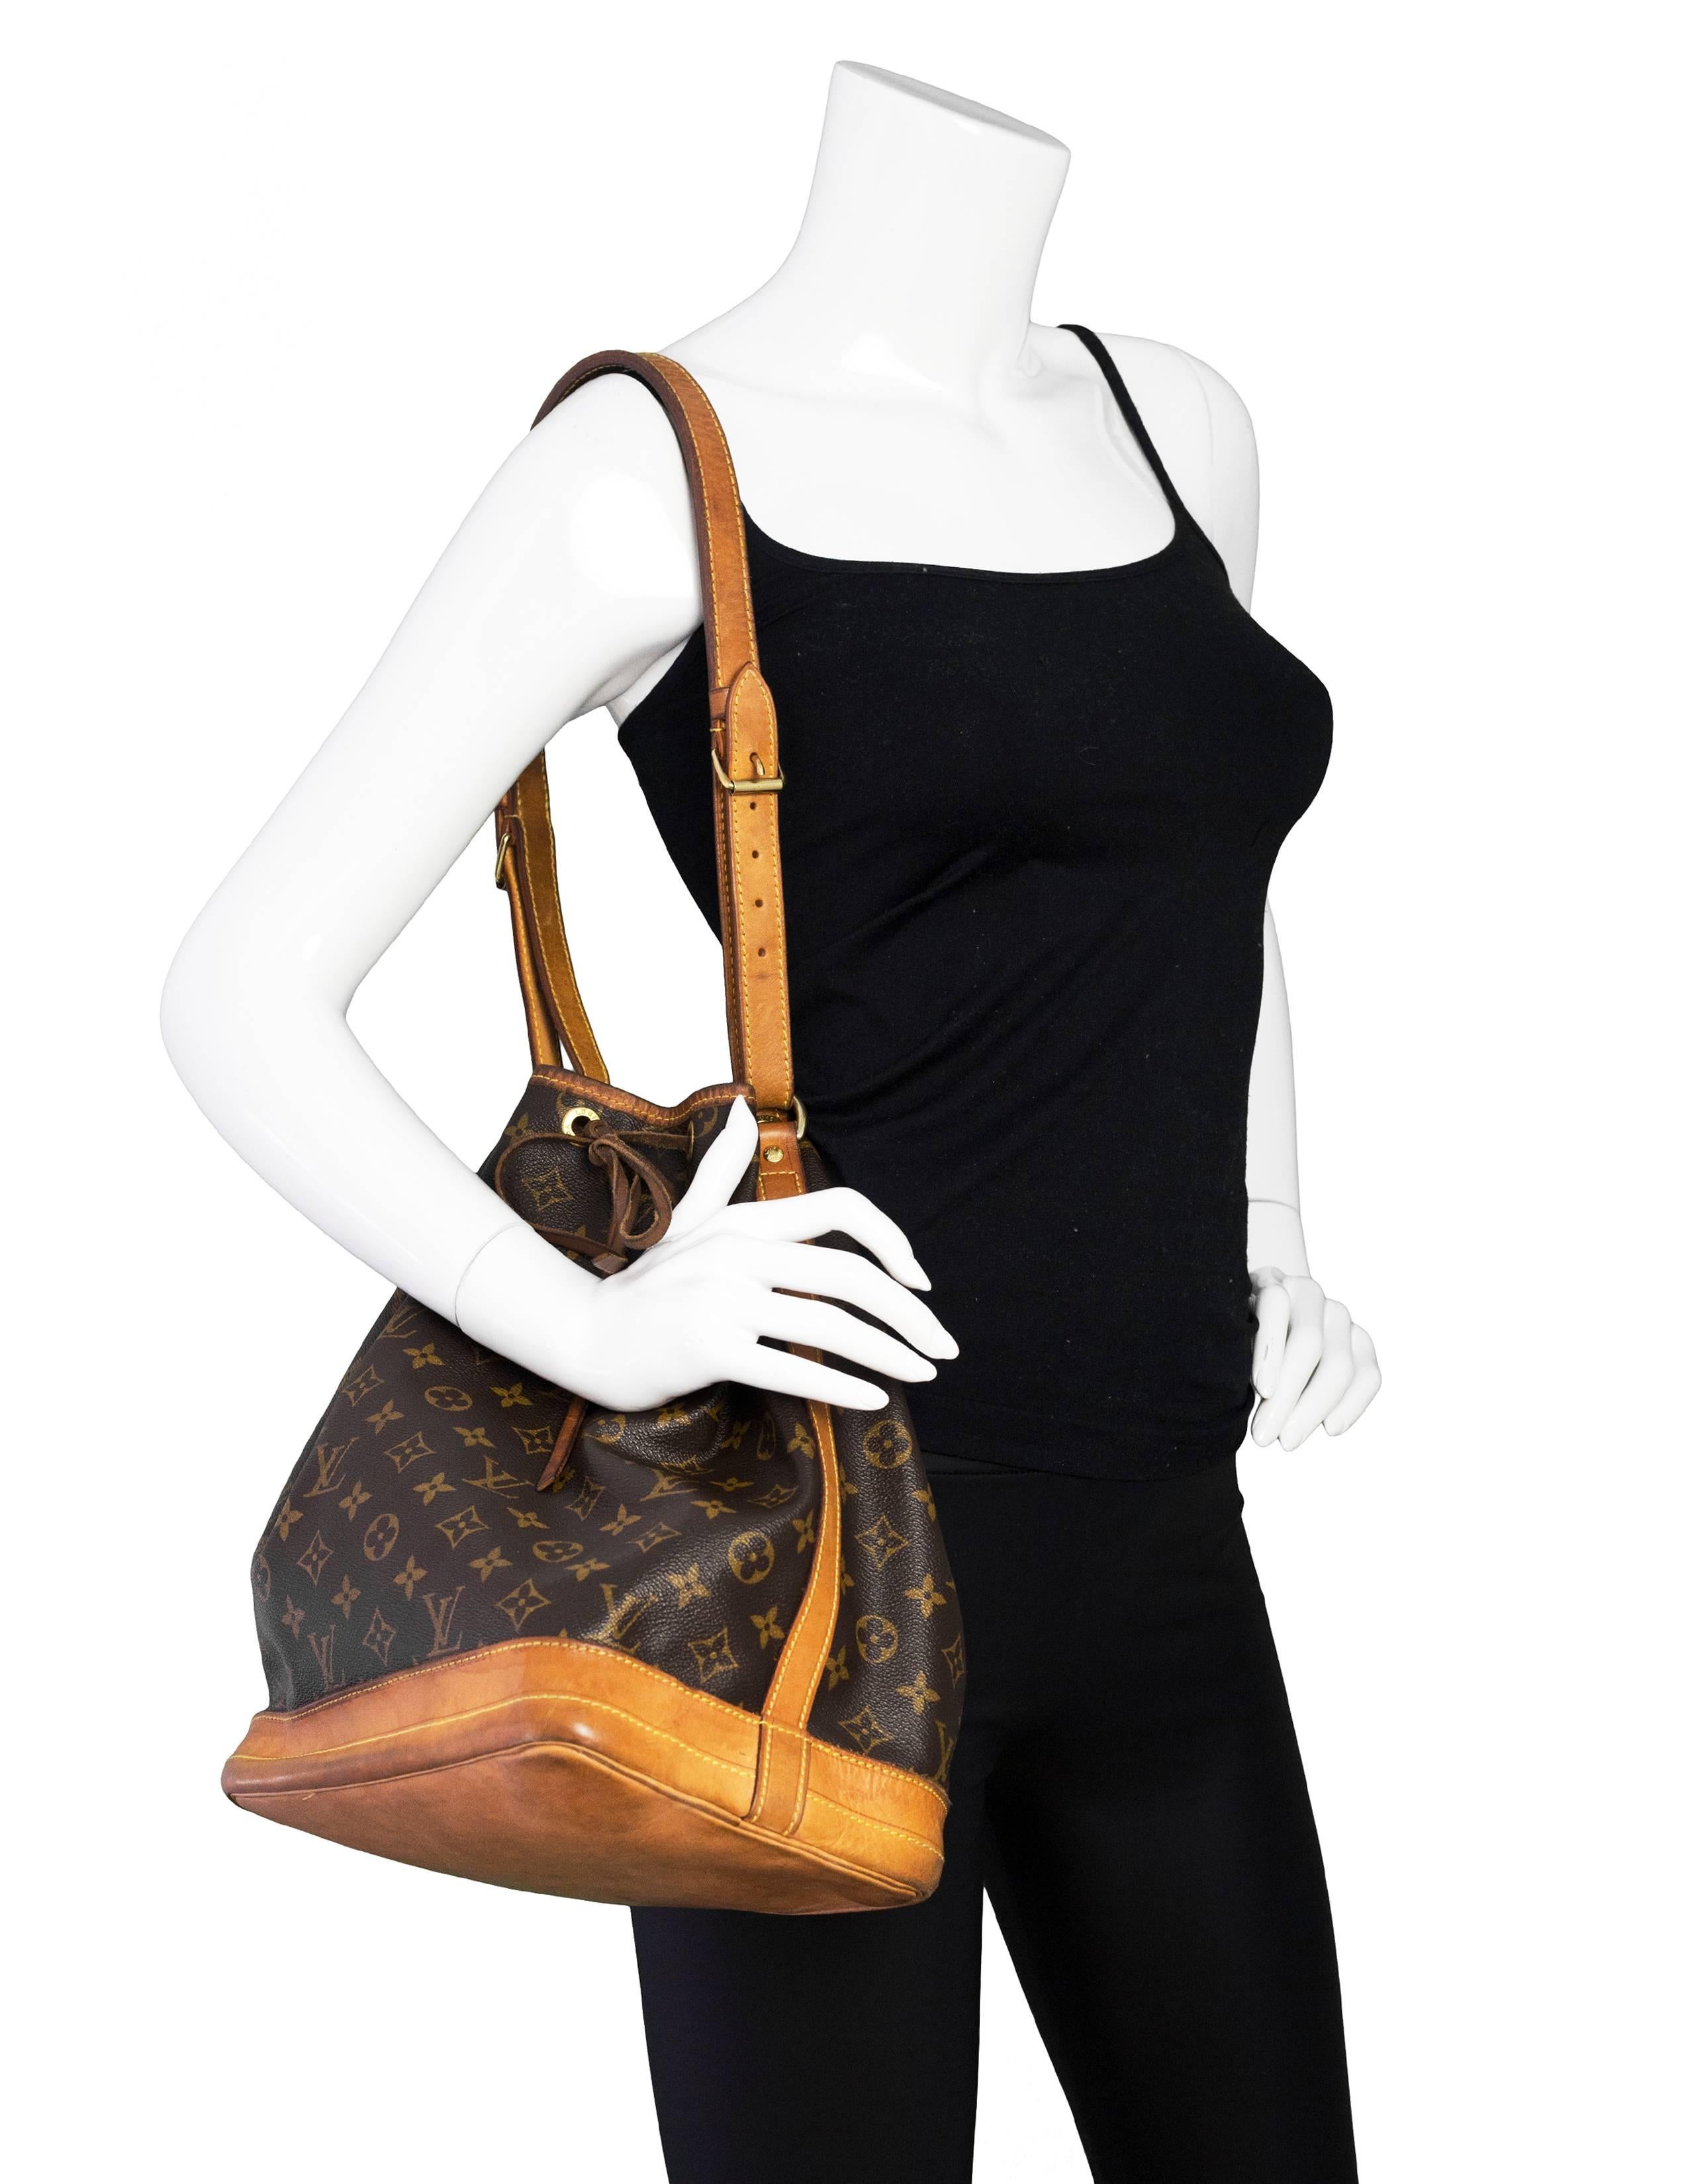 Louis Vuitton Vintage Monogram Noe Bucket Bag

Made In: France
Color: Brown and tan
Hardware: Goldtone
Materials: Coated canvas, vachetta leather
Lining: Brown canvas
Closure/Opening: Open top with vachetta drawstring tie closure
Retail Price: